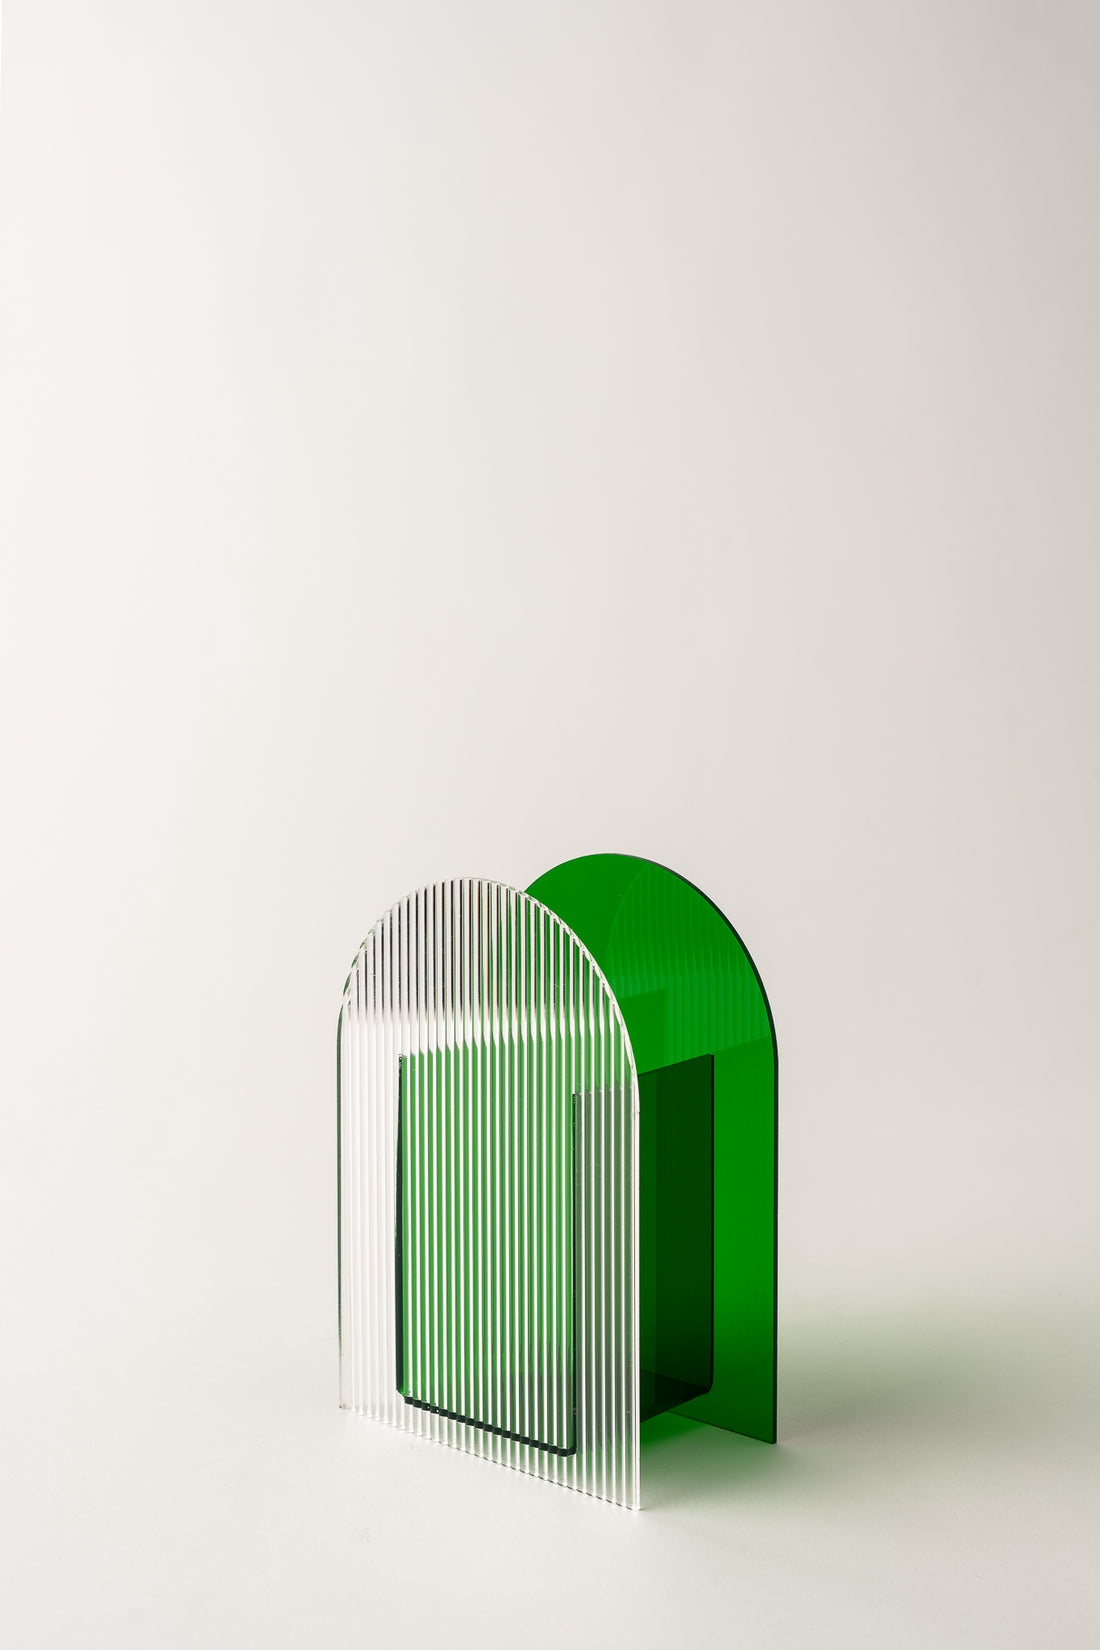 Green & Ribbed Arched Perspex Vase